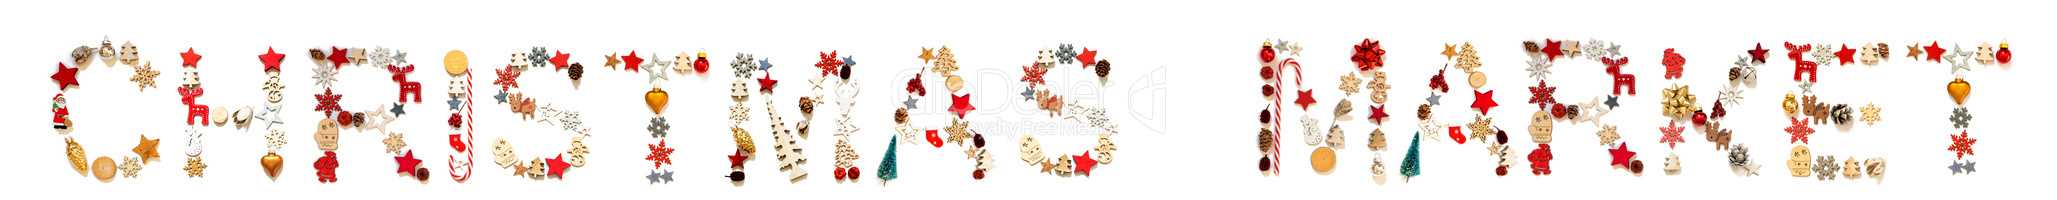 Colorful Christmas Decoration Letter Building Word Christmas Market